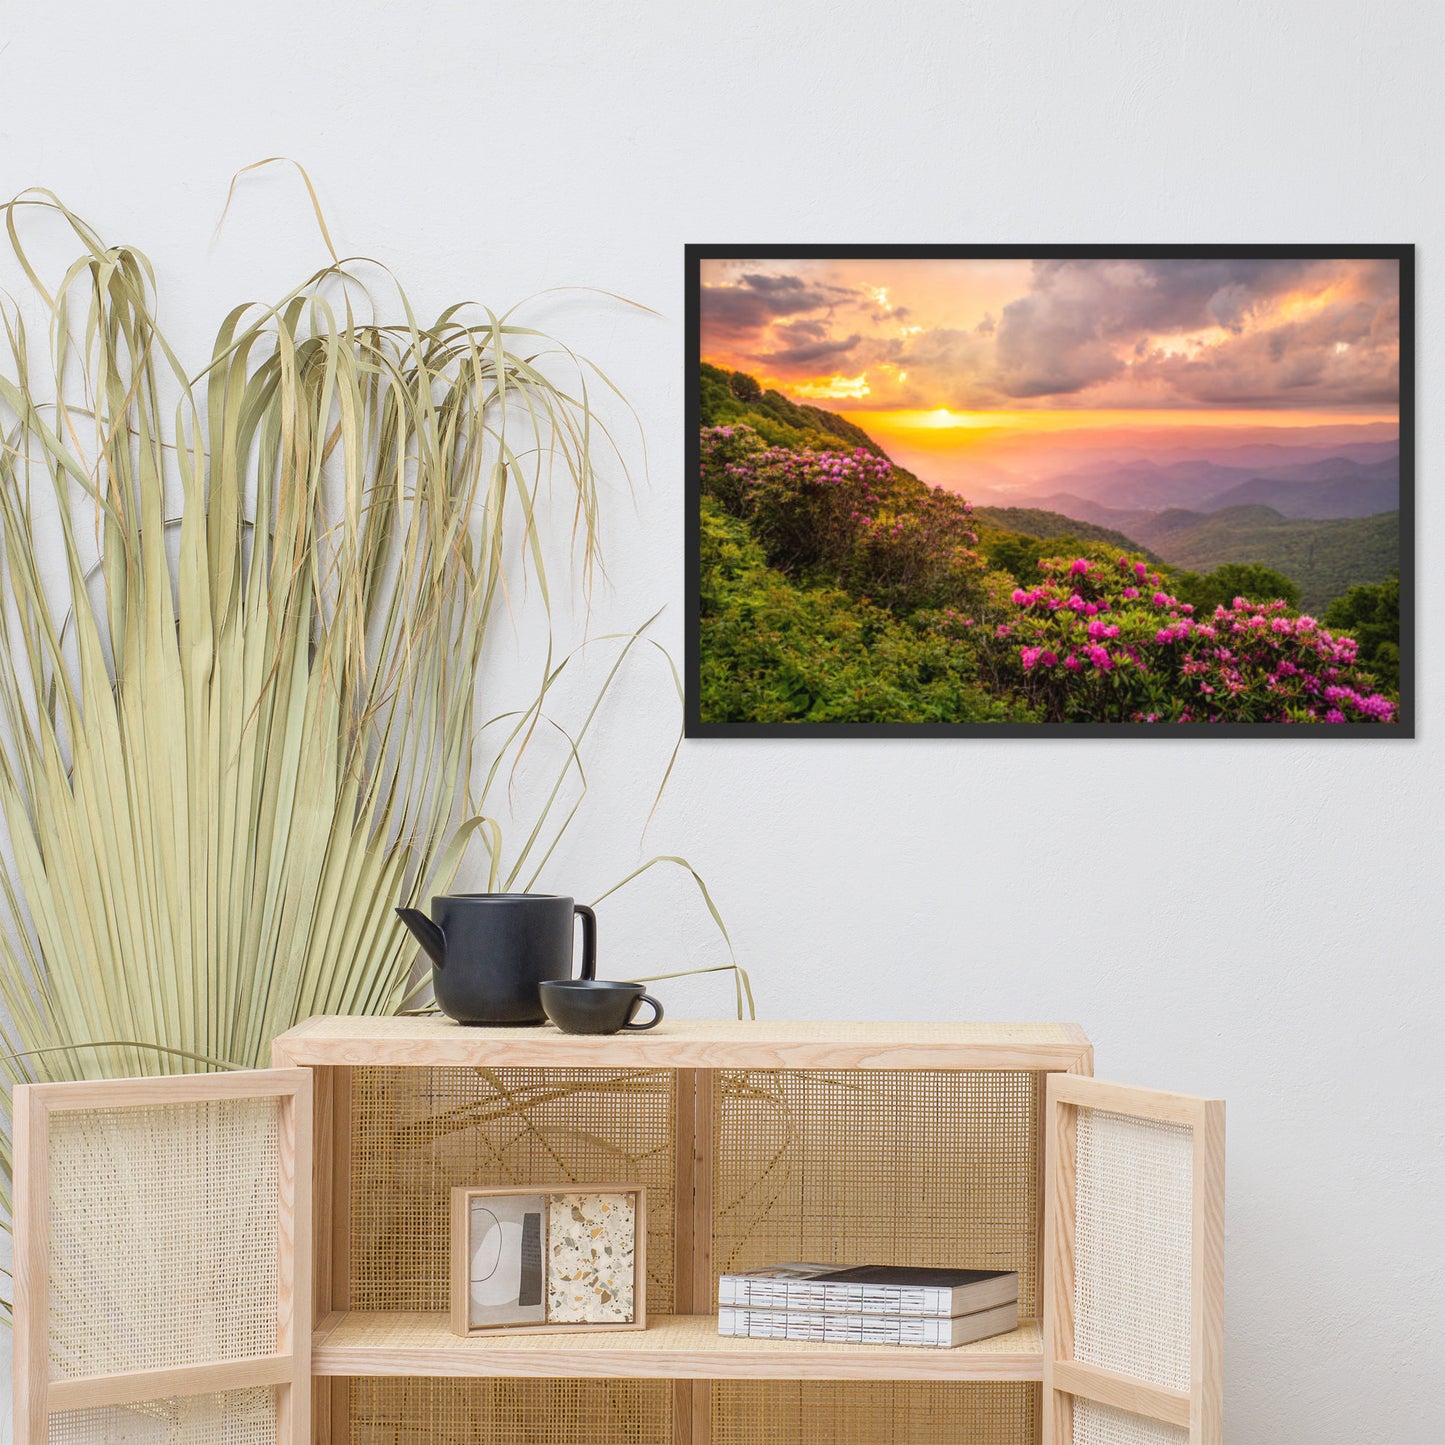 Close of the Day Landscape Photograph Framed Wall Art Print